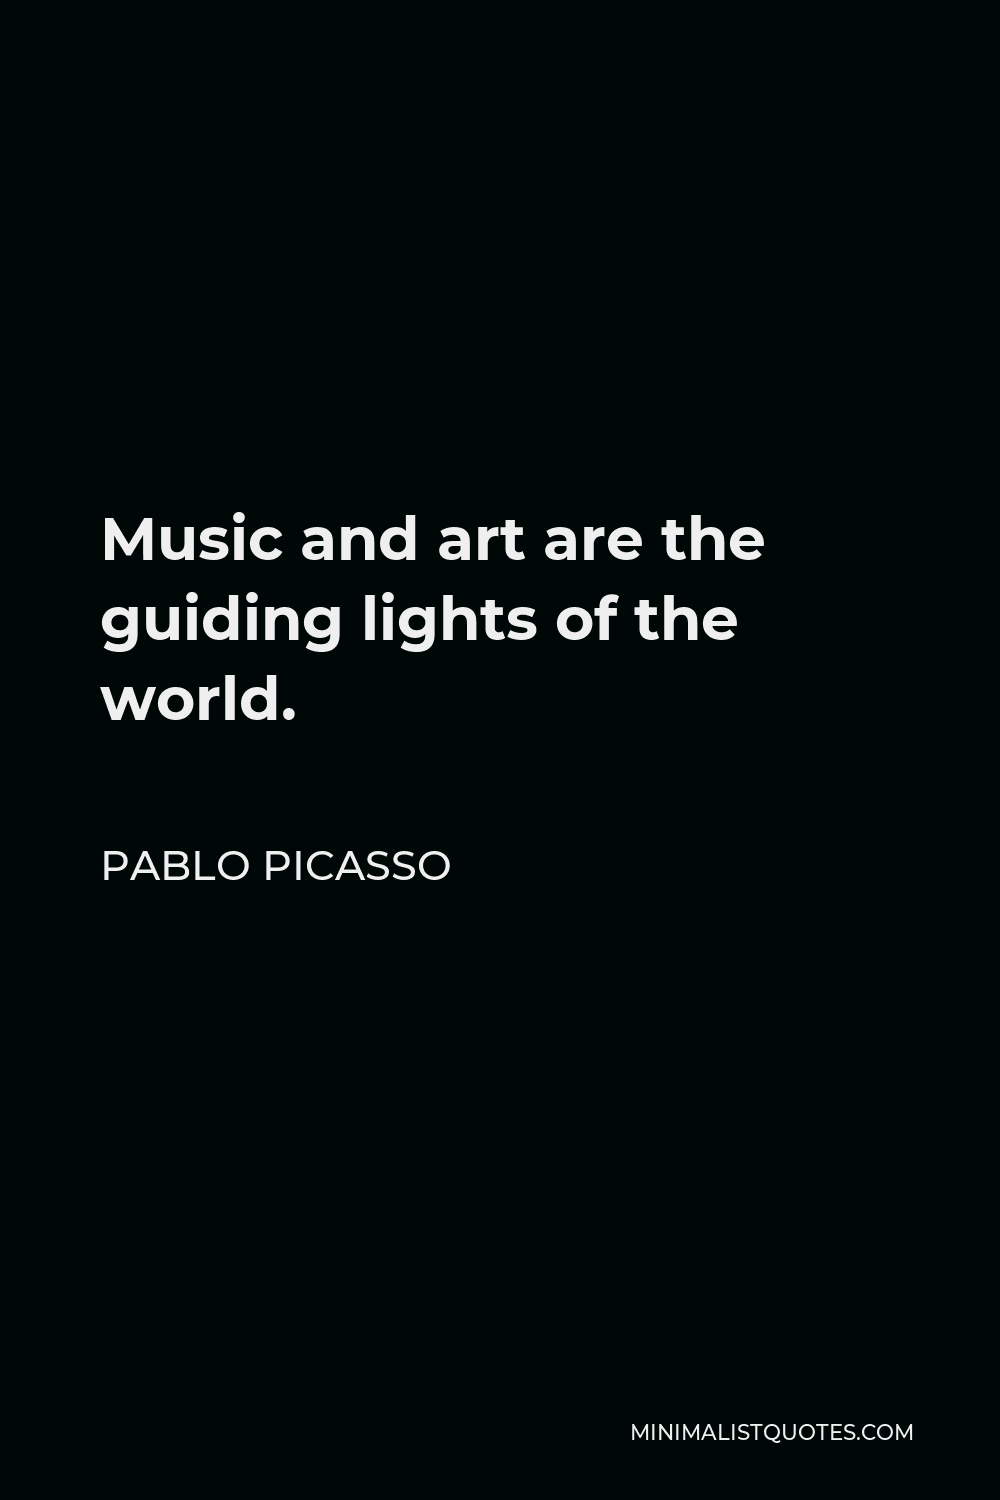 Pablo Picasso Quote - Music and art are the guiding lights of the world.